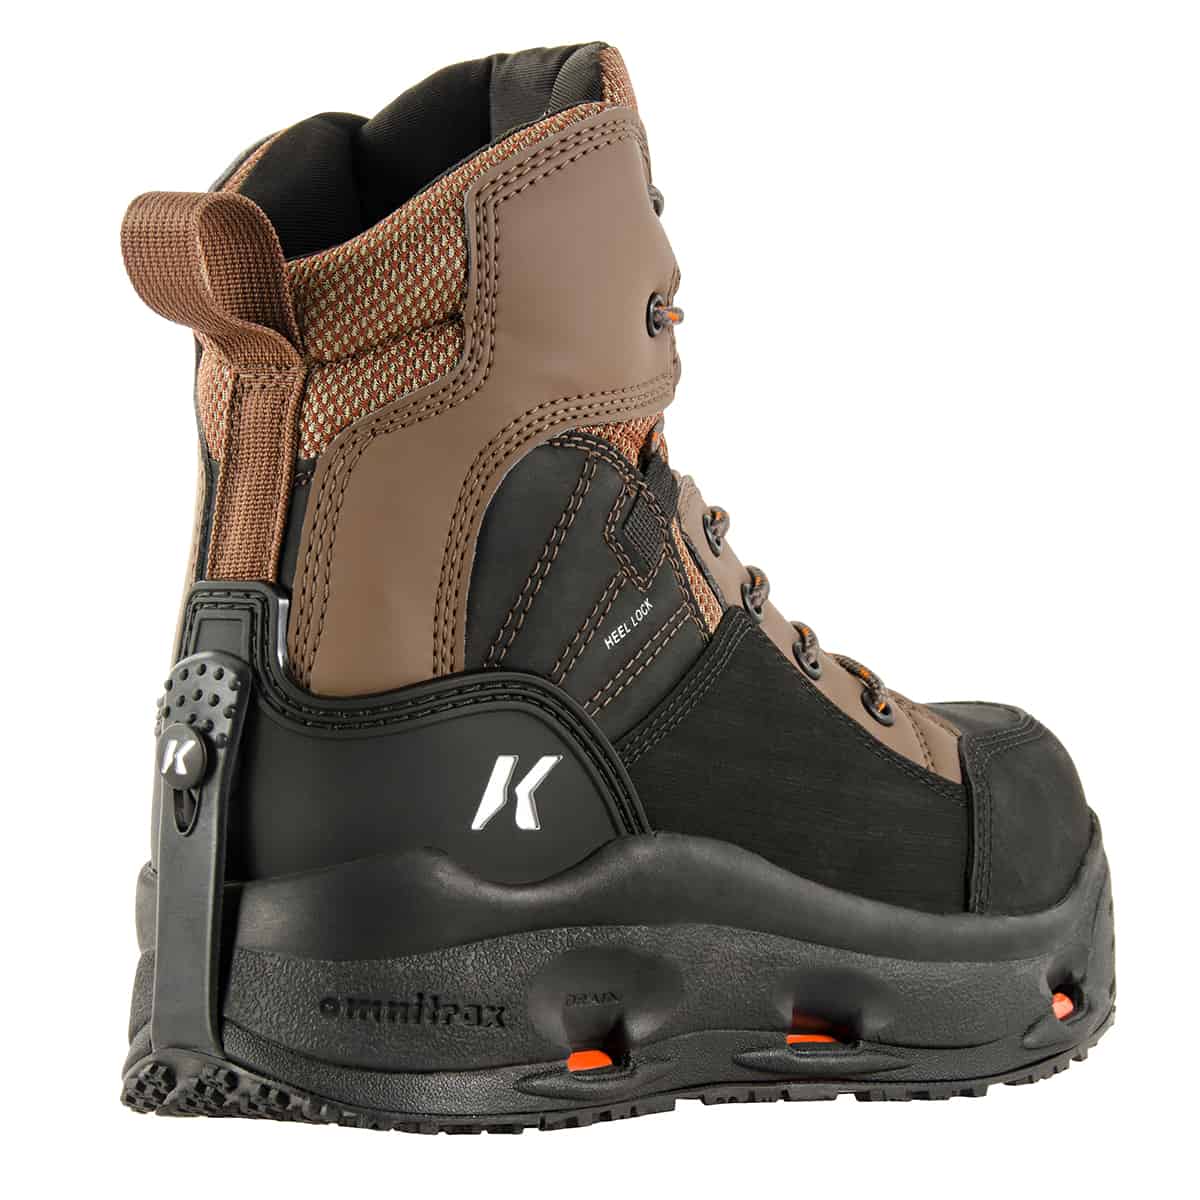 korkers buckskin wading boot 3qtr rear budget friendly fly fishing wading boot